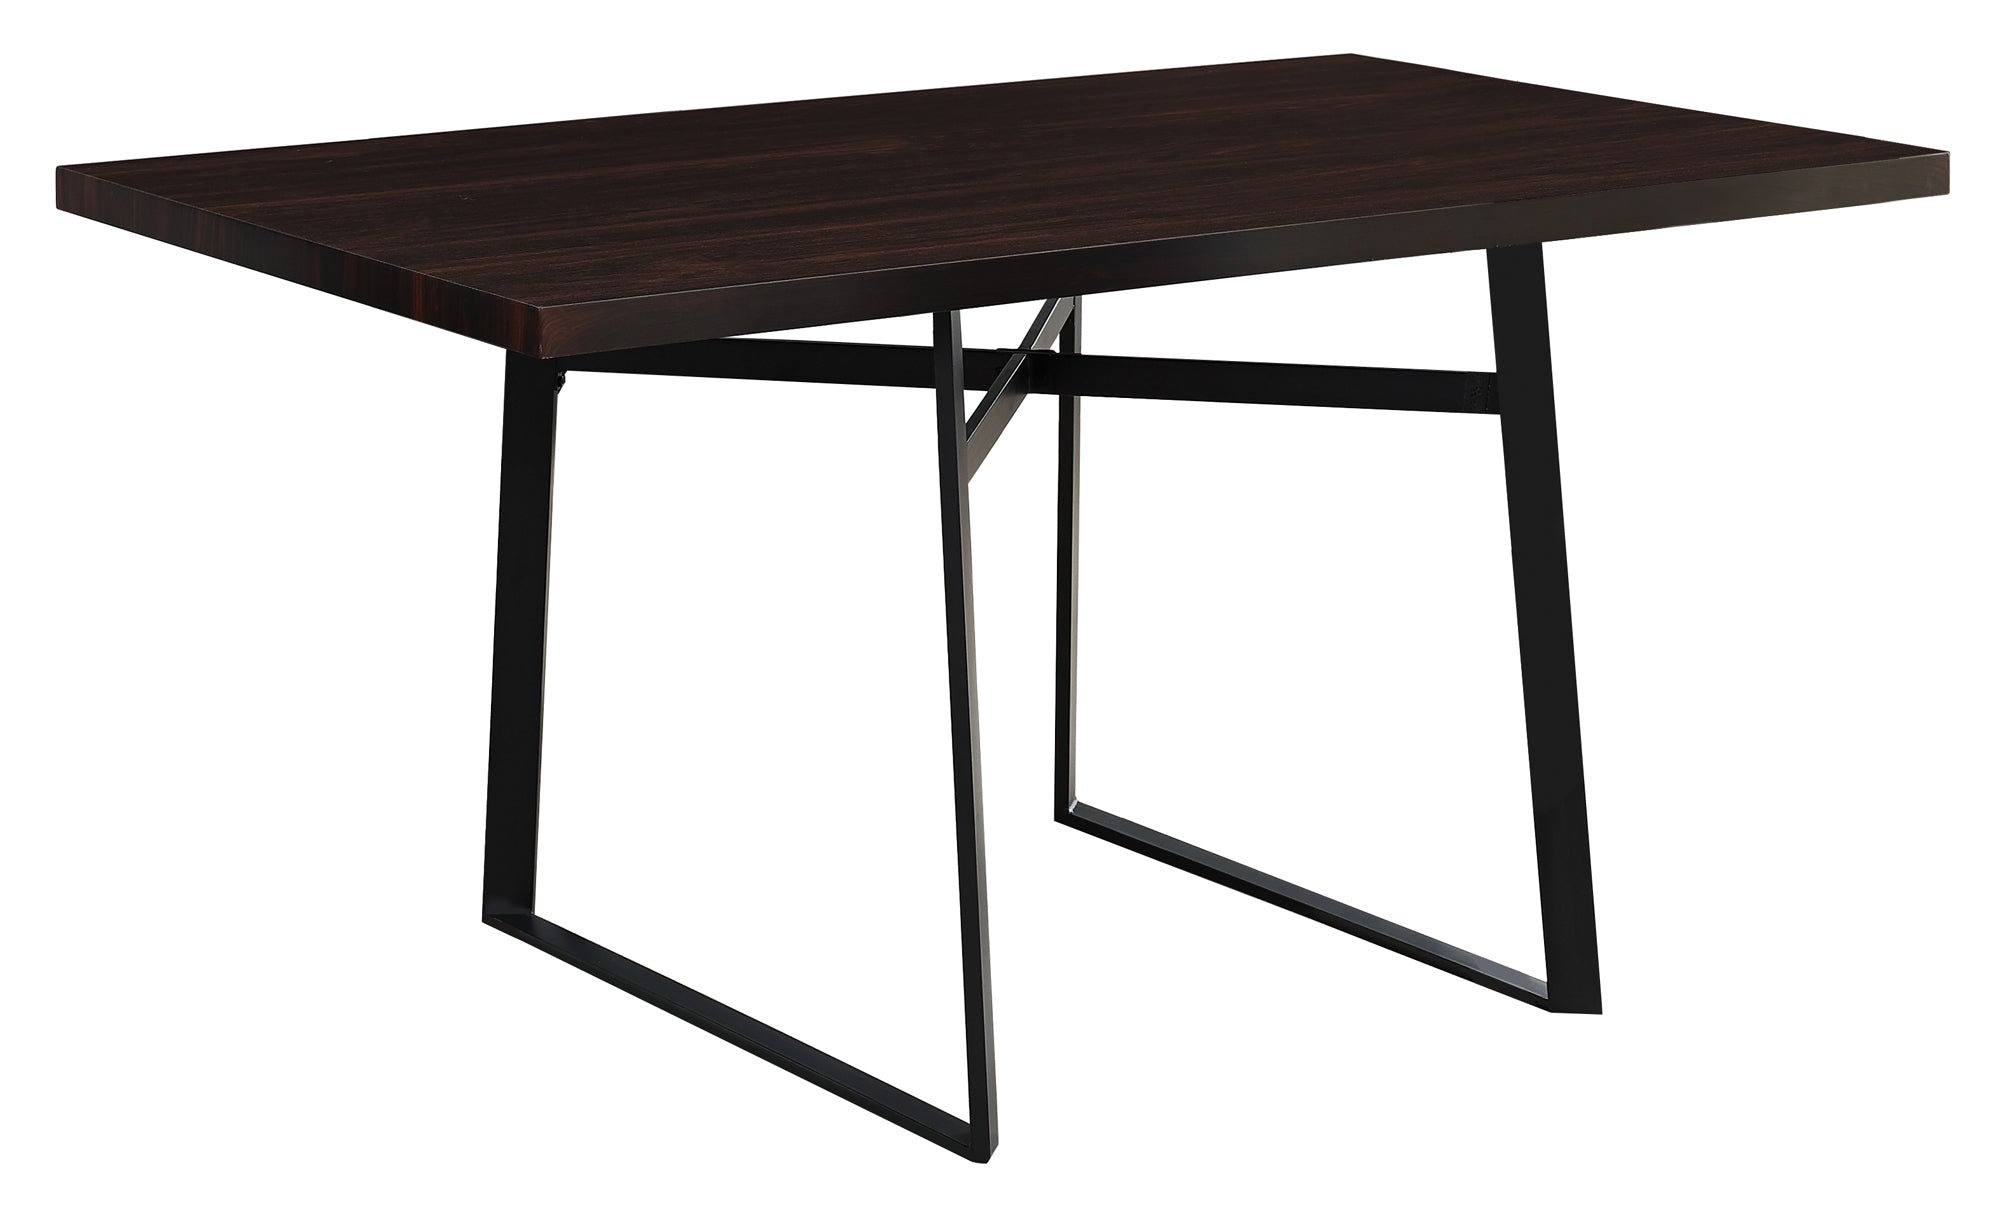 Espresso Finished 36" x 60" Elegant Dining Table With Sturdy Metal Legs